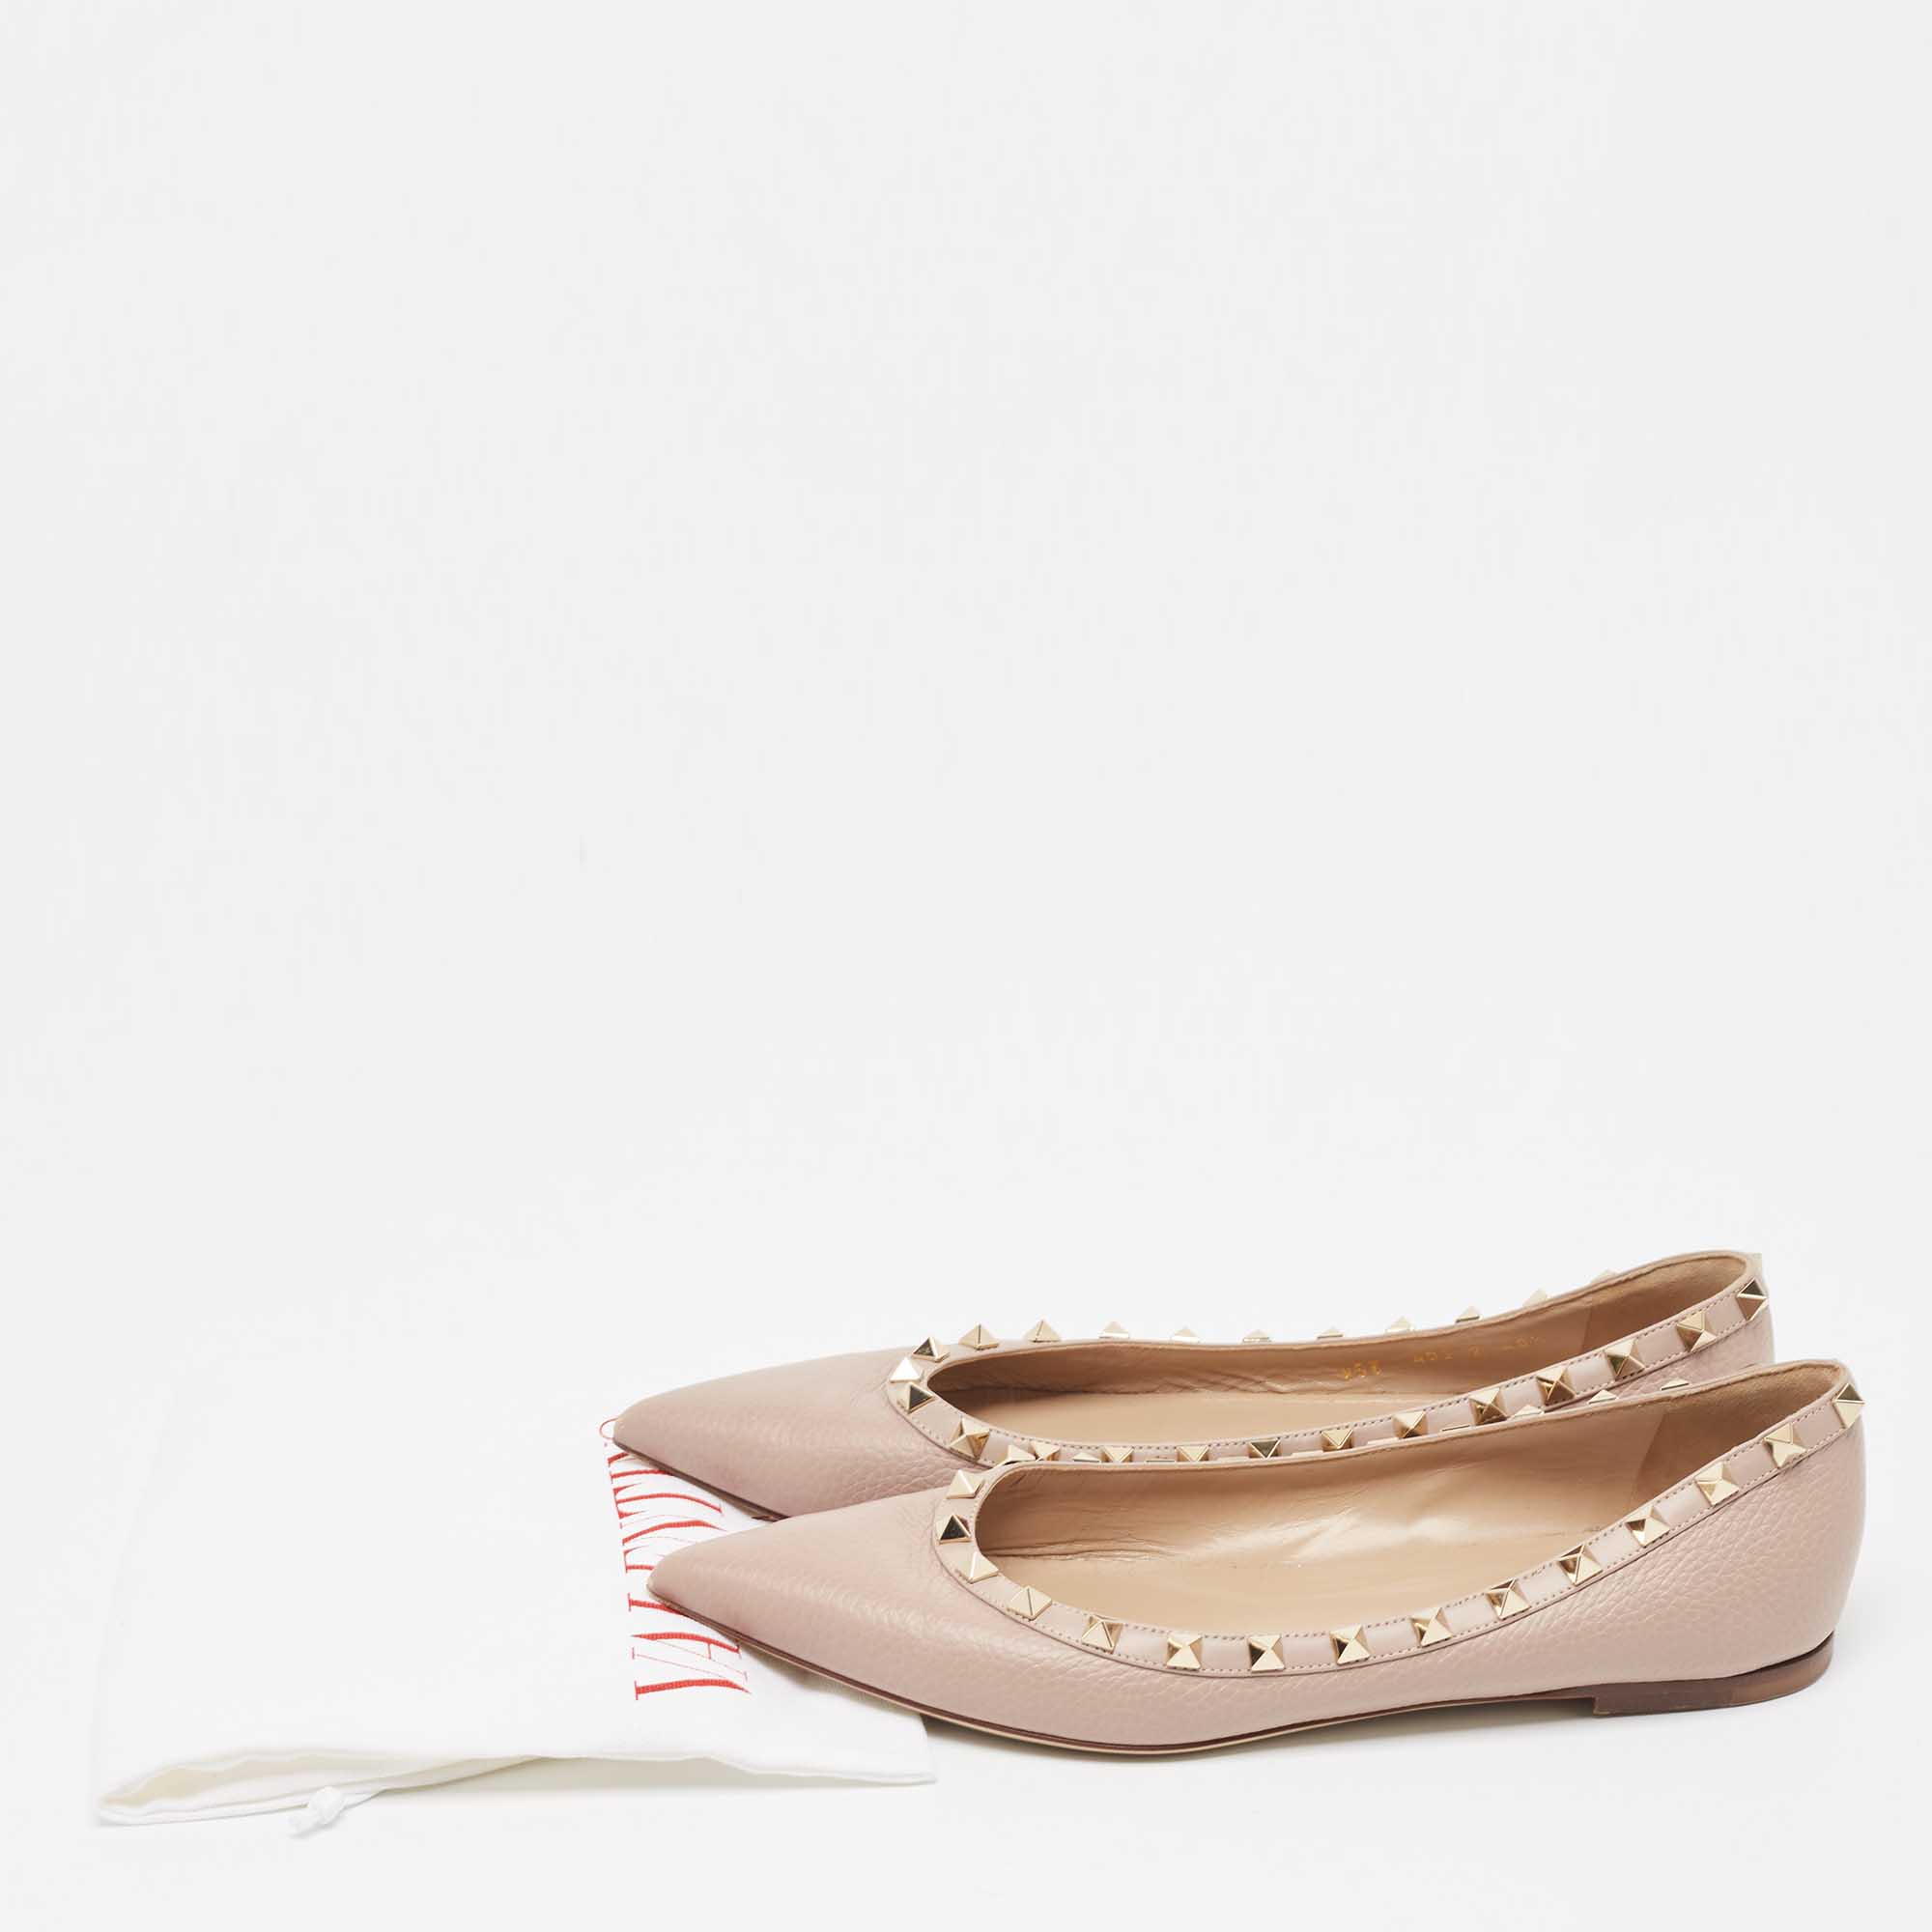 Valentino Dusty Pink Leather Rockstud Ballet Flats Size 40.5